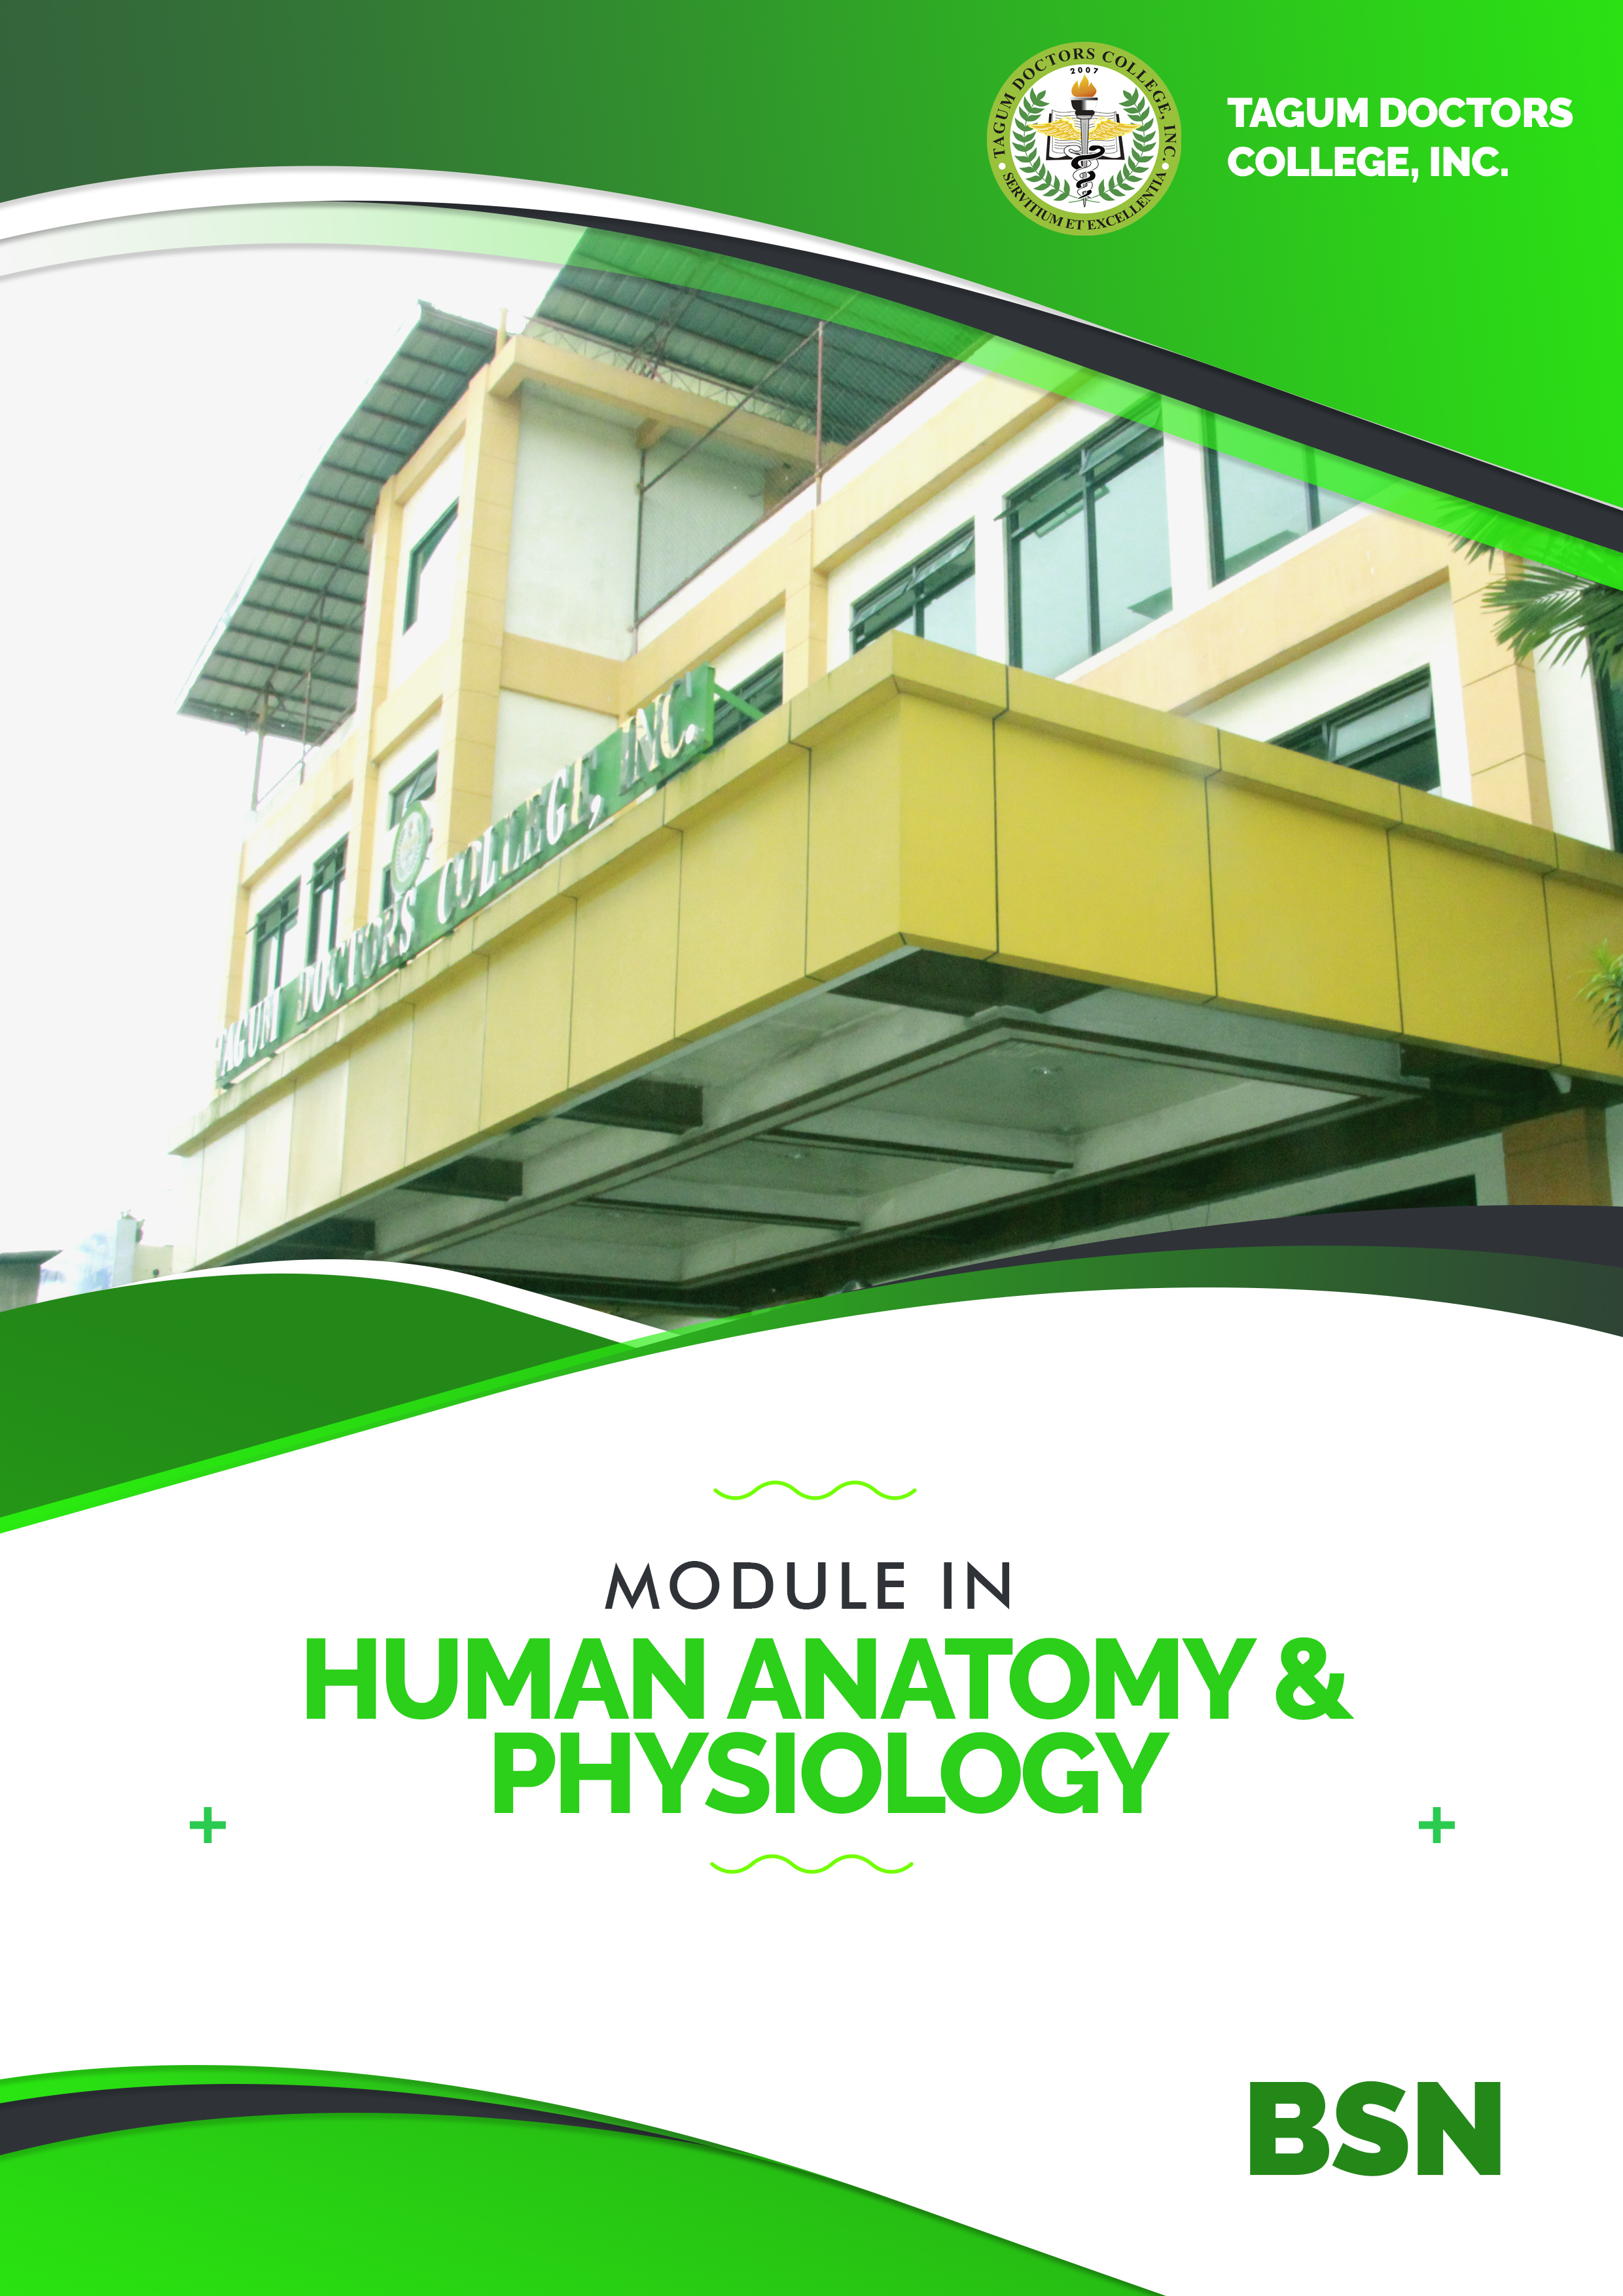 Human Anatomy and Physiology Lec - BSN 1-A